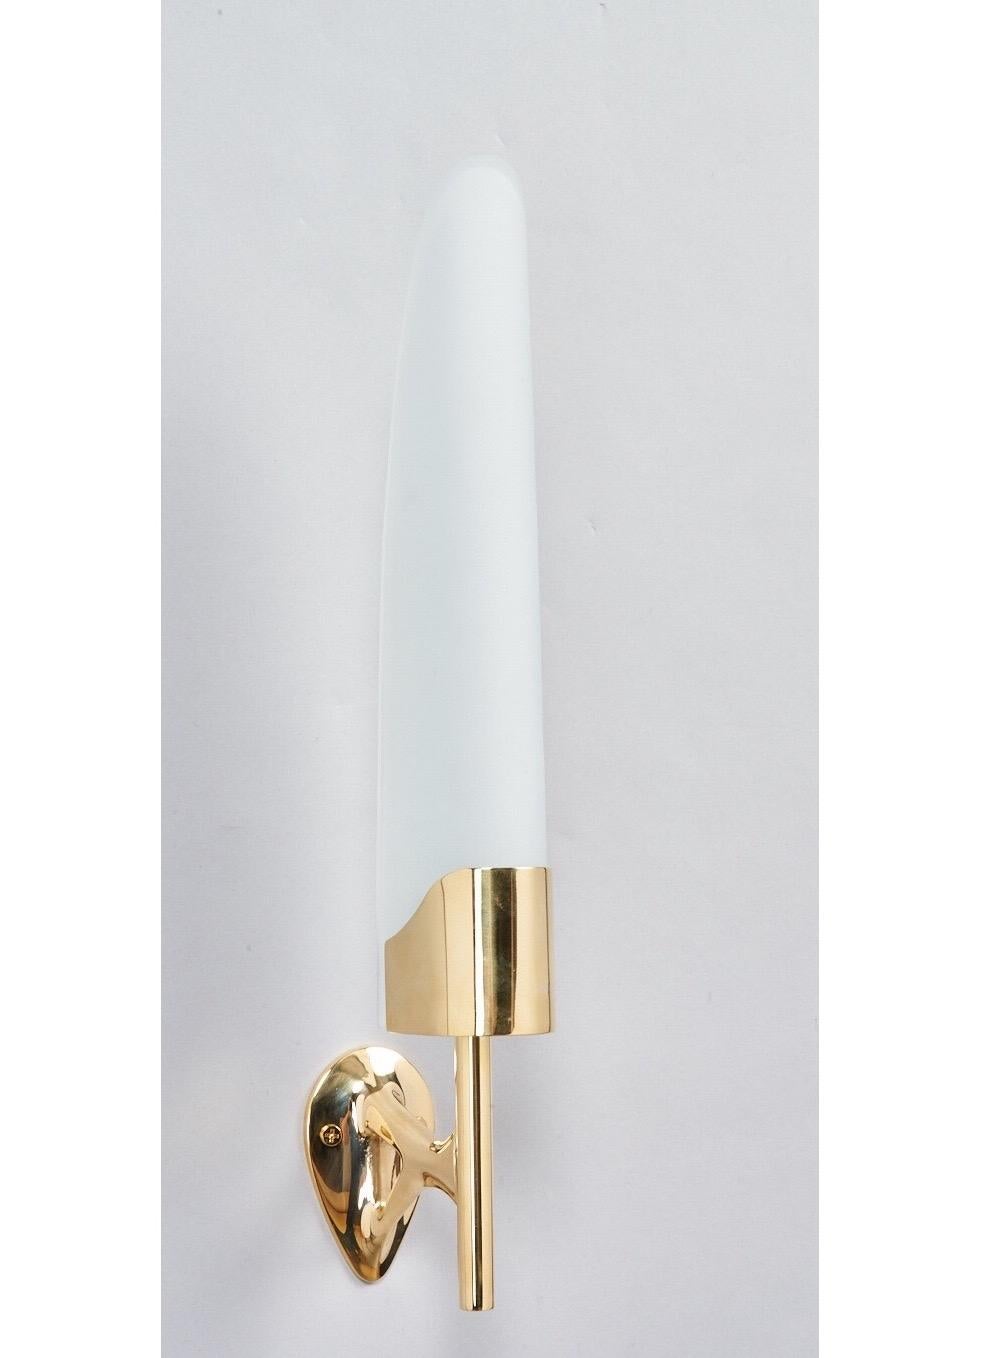 Italian Max Ingrand for Fontana Arte Long Sculptural Brass and Glass Sconces Italy 1950s For Sale